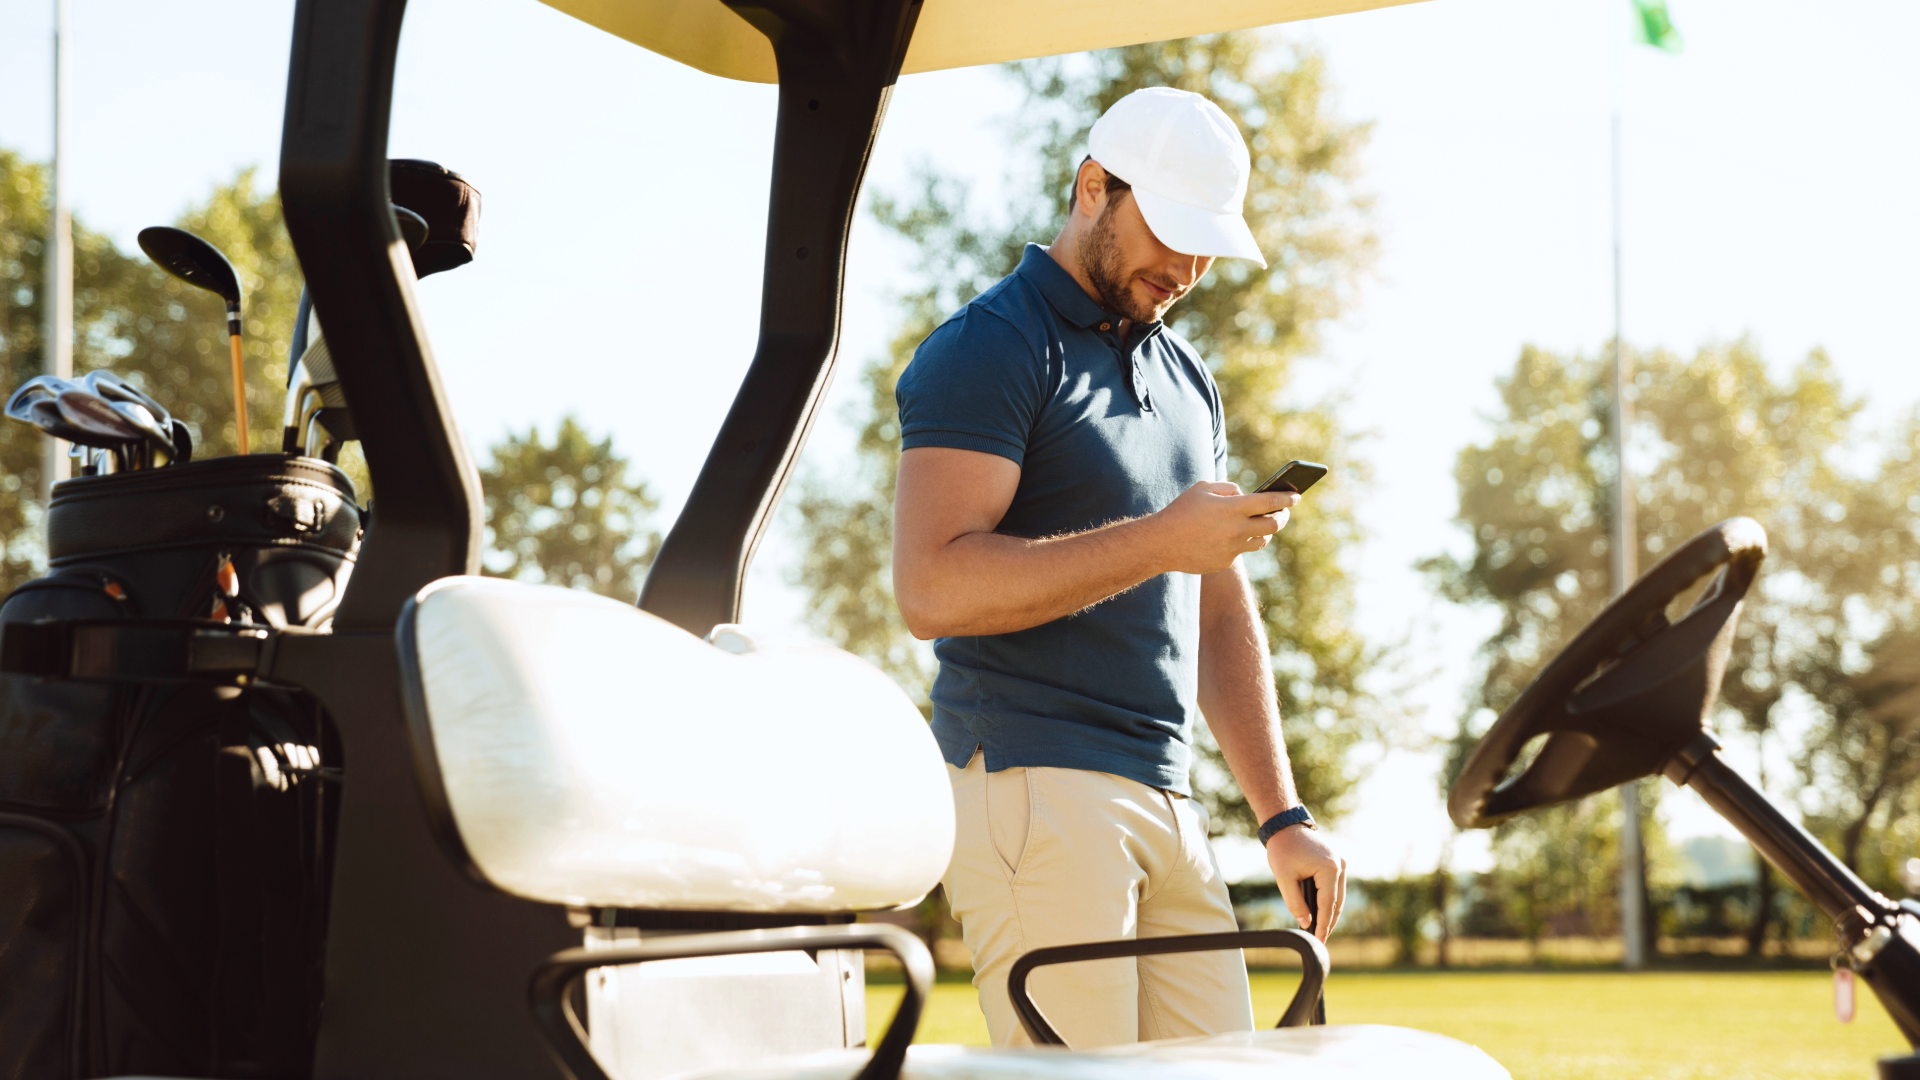 Golfer looking at phone next to golf cart